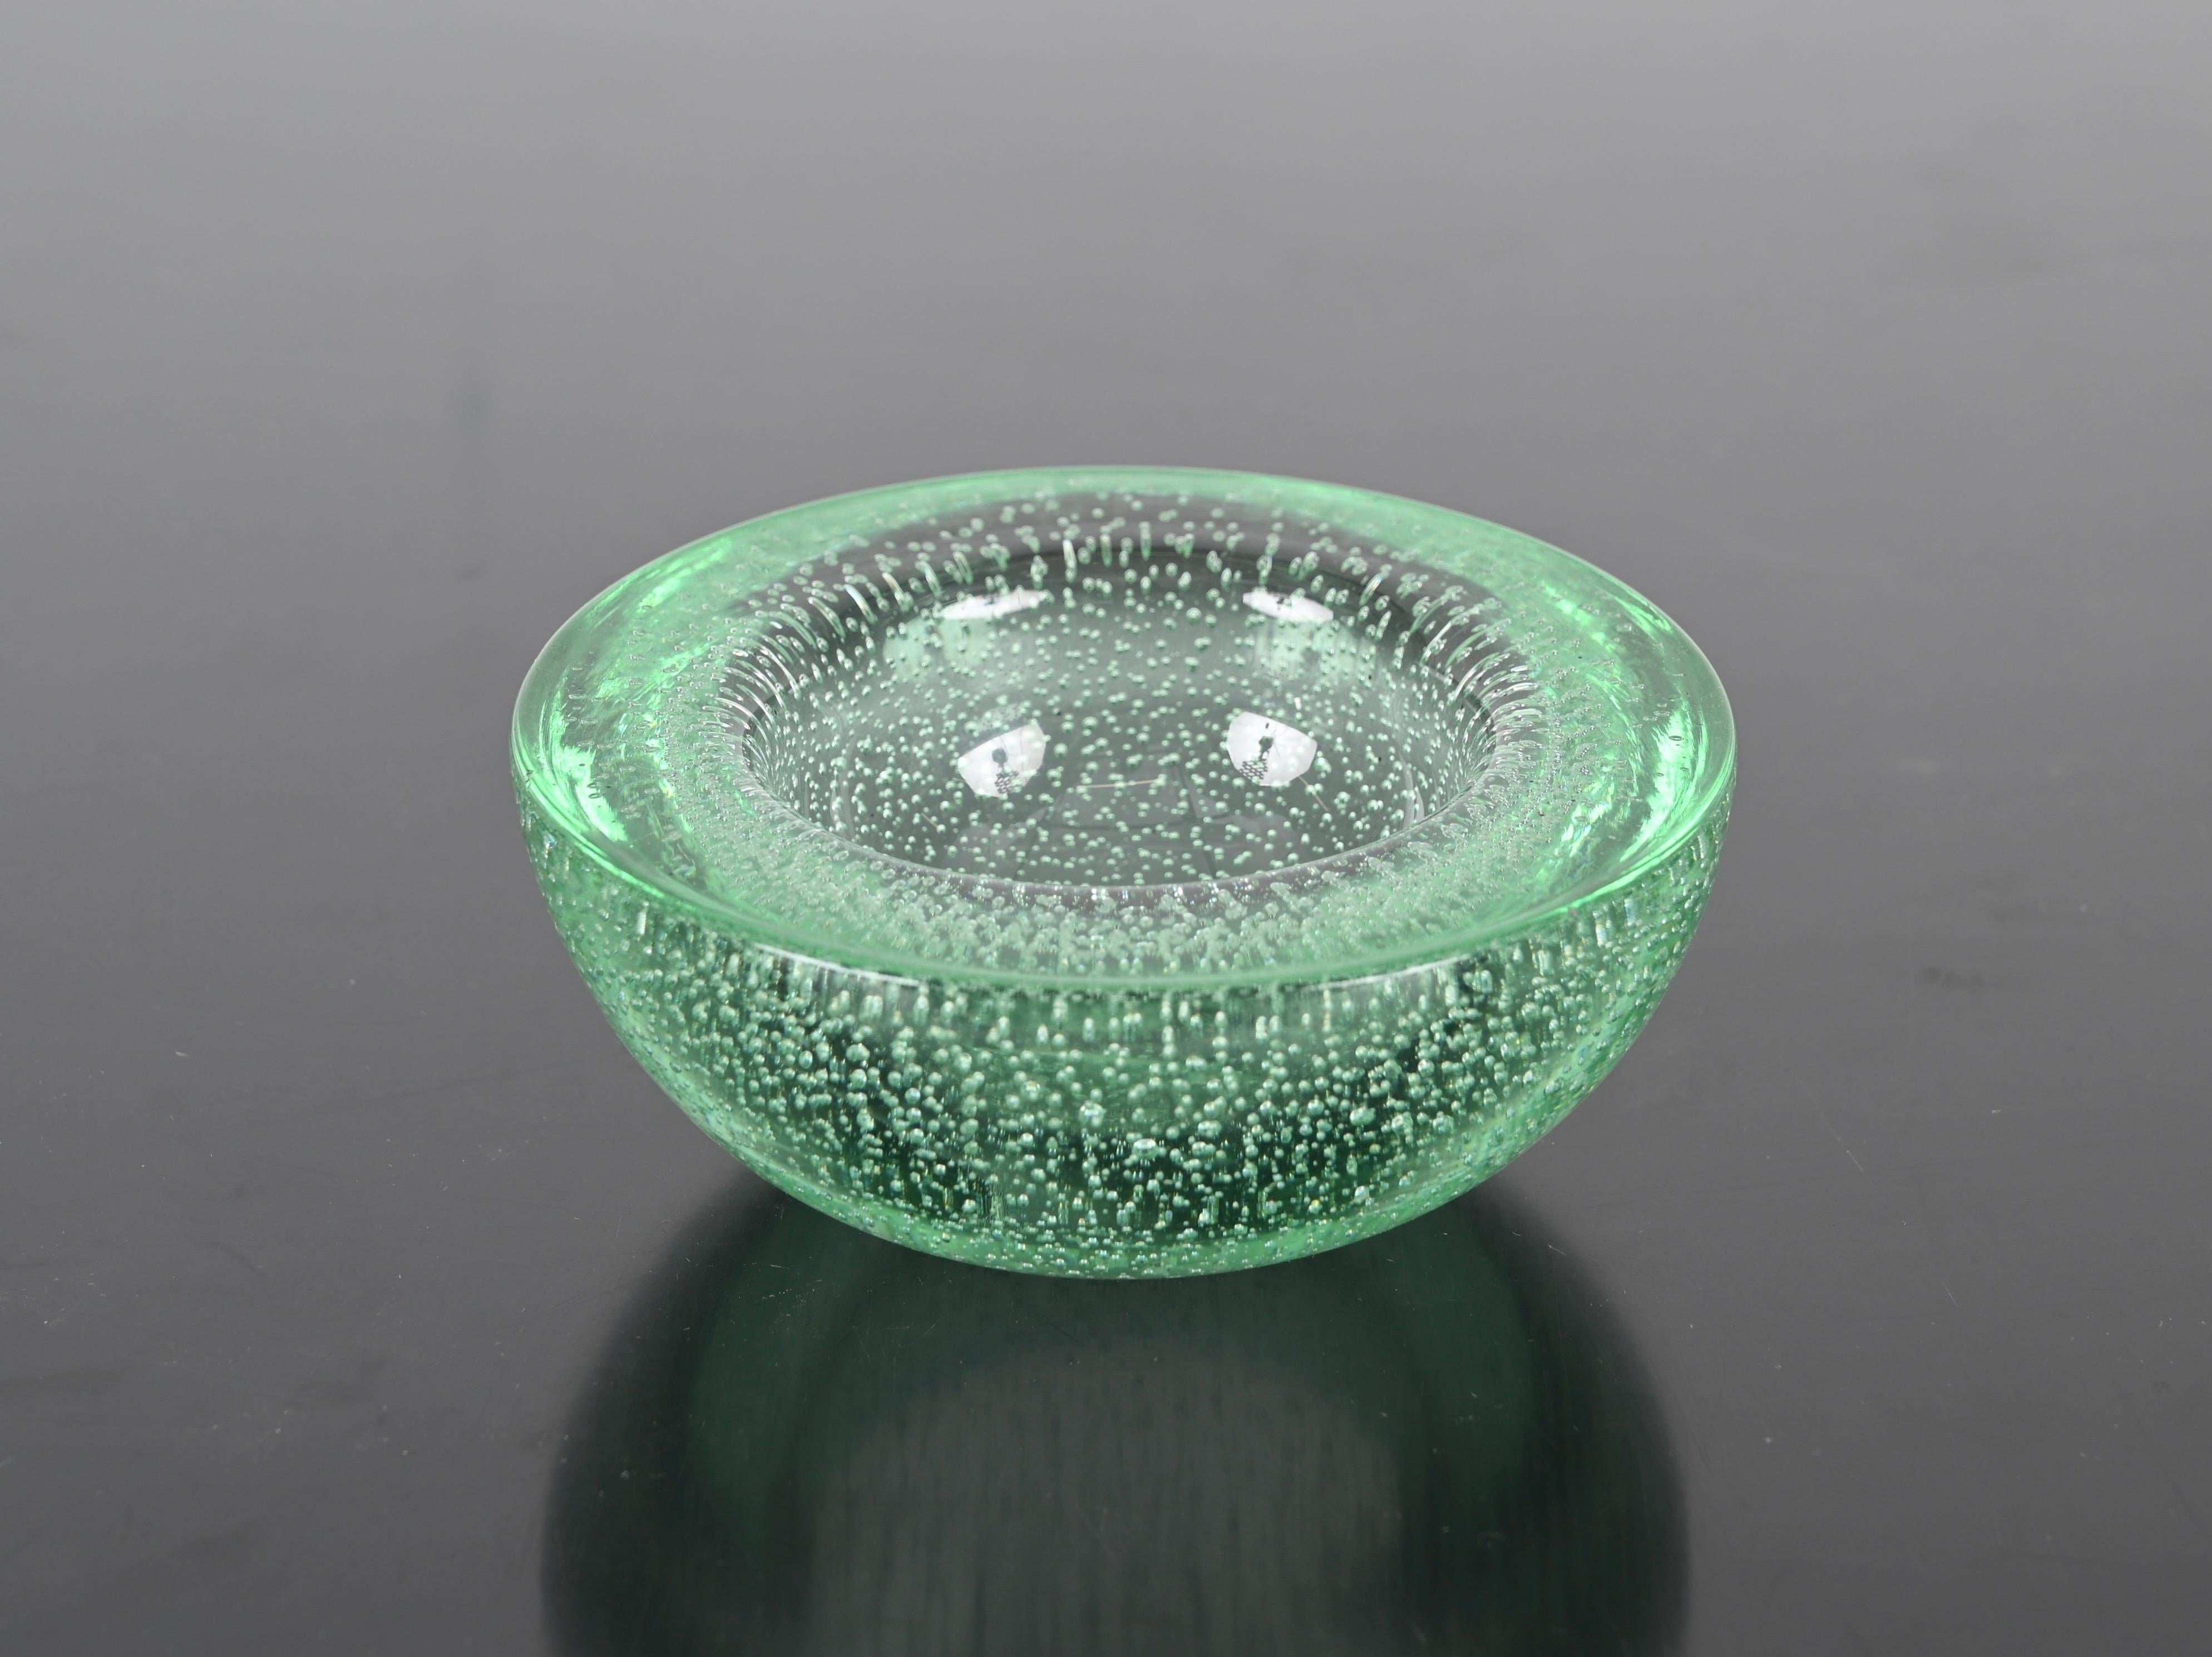 Stunning round bowl or ashtray made in a gorgeous aquamarine Murano glass using the 